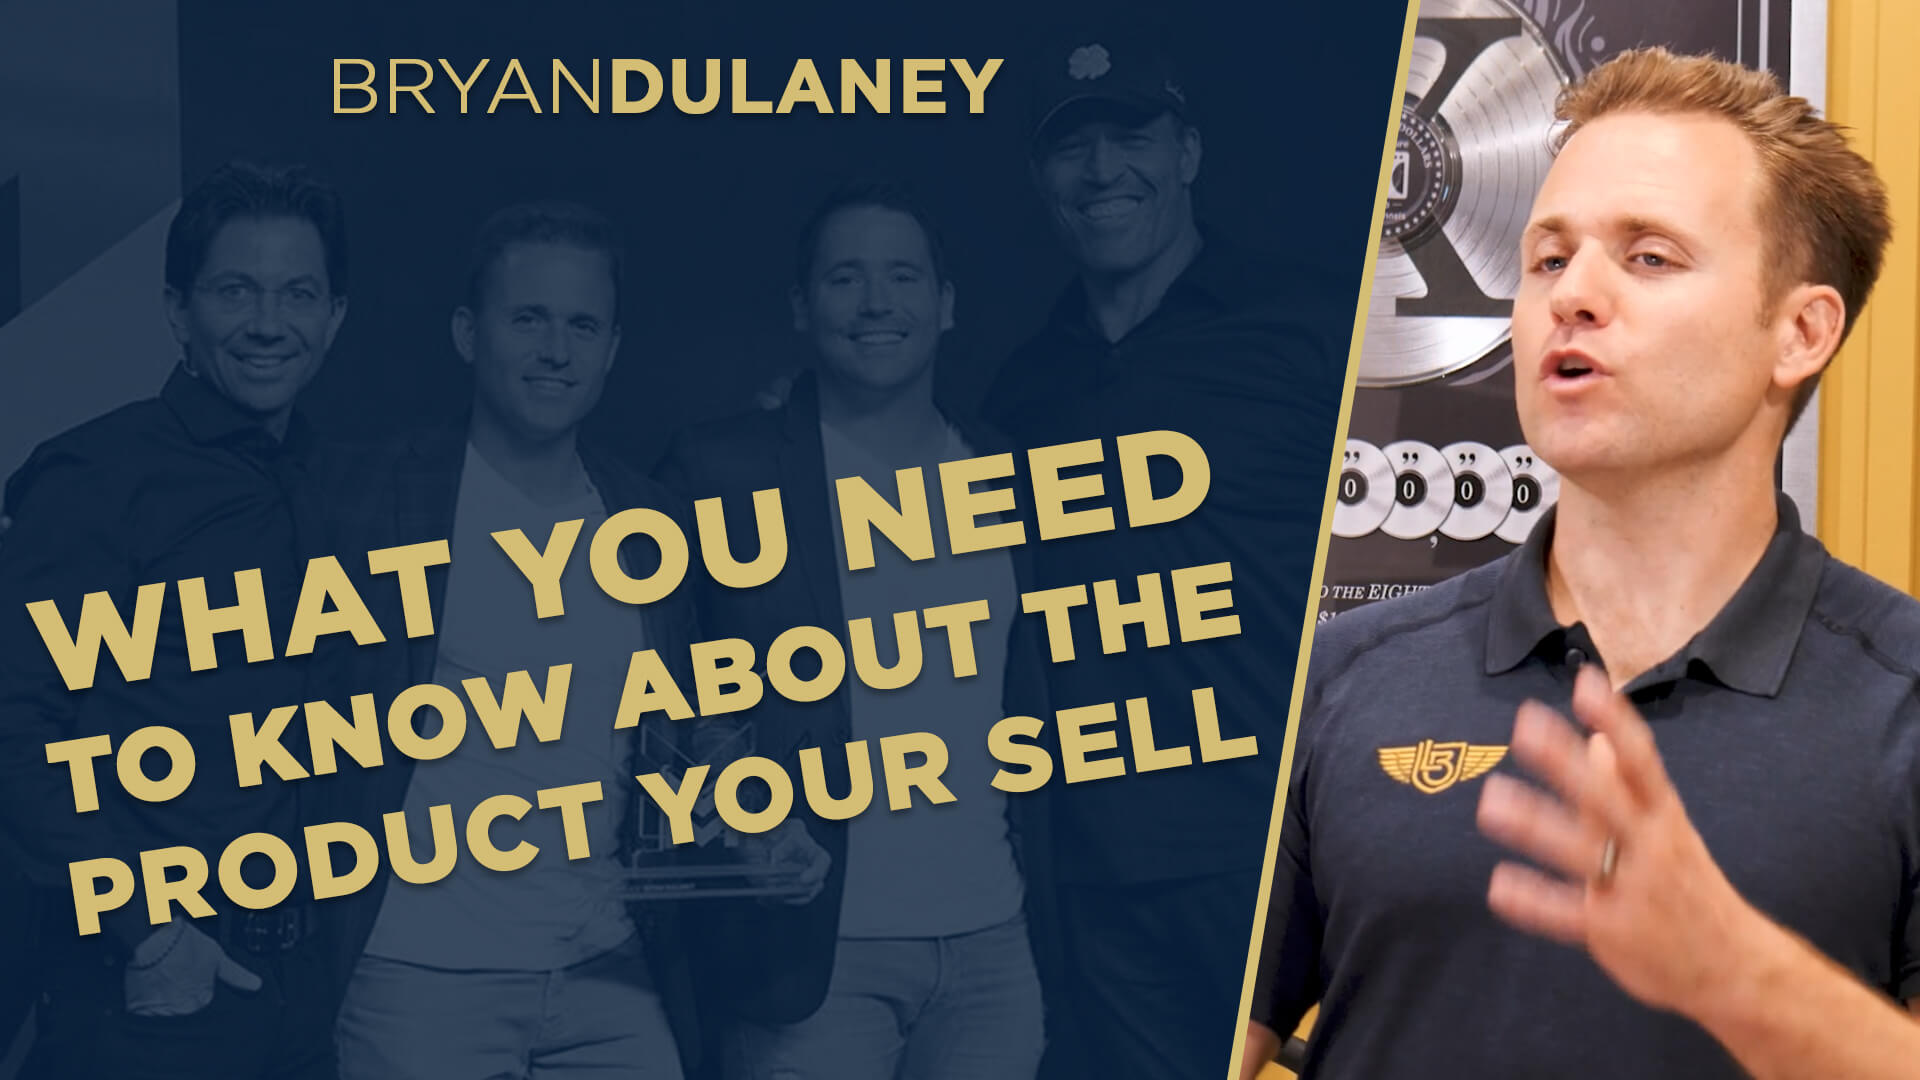 What You Need To Know About The Product You Sell